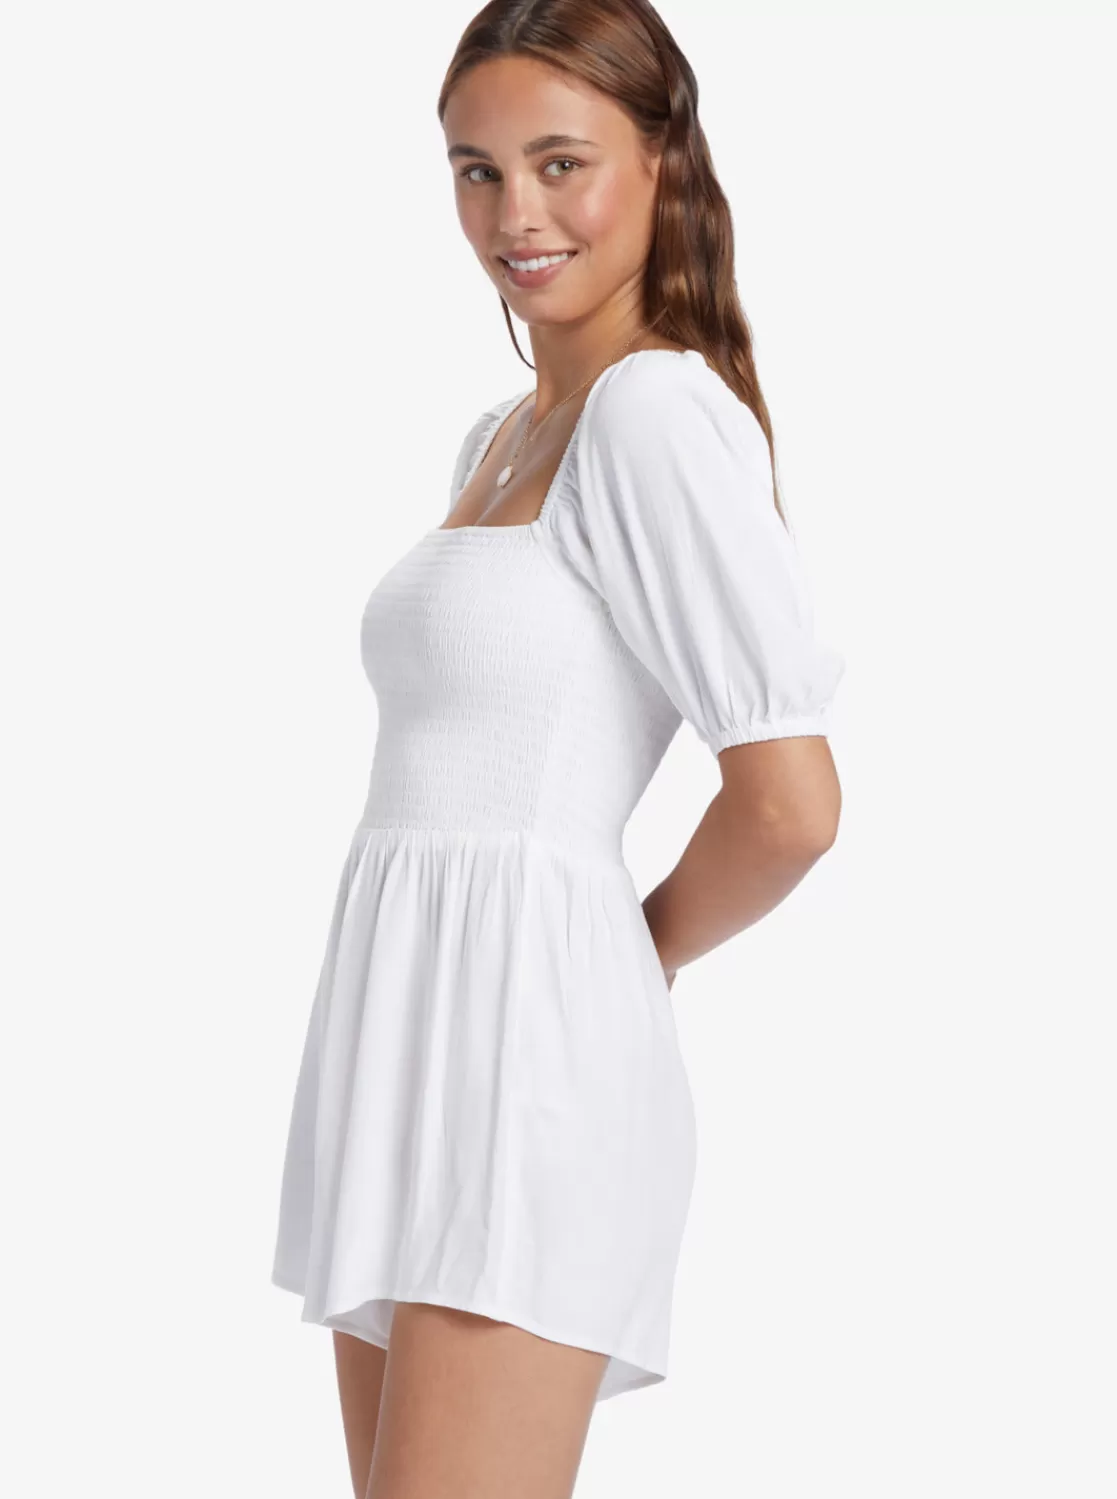 Barefoot Babe Romper-ROXY Outlet